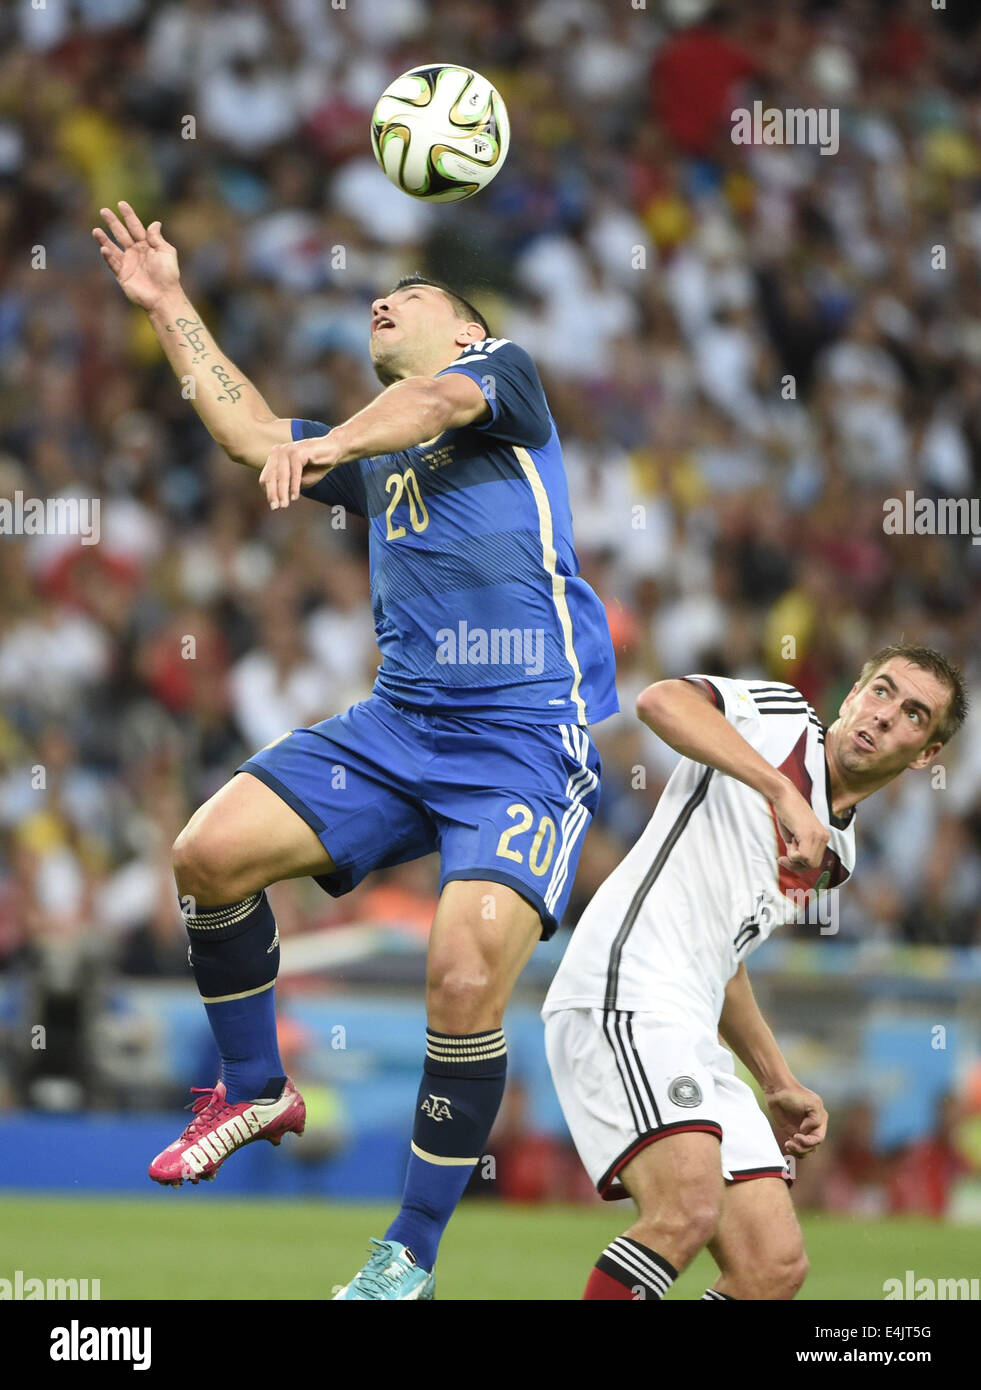 Rio De Janeiro, Brazil. 13th July, 2014. Argentina's Sergio Aguero (L) heads the ball against Germany's Philipp Lahm during the final match between Germany and Argentina of 2014 FIFA World Cup at the Estadio do Maracana Stadium in Rio de Janeiro, Brazil, on July 13, 2014. Credit:  Yang Lei/Xinhua/Alamy Live News Stock Photo